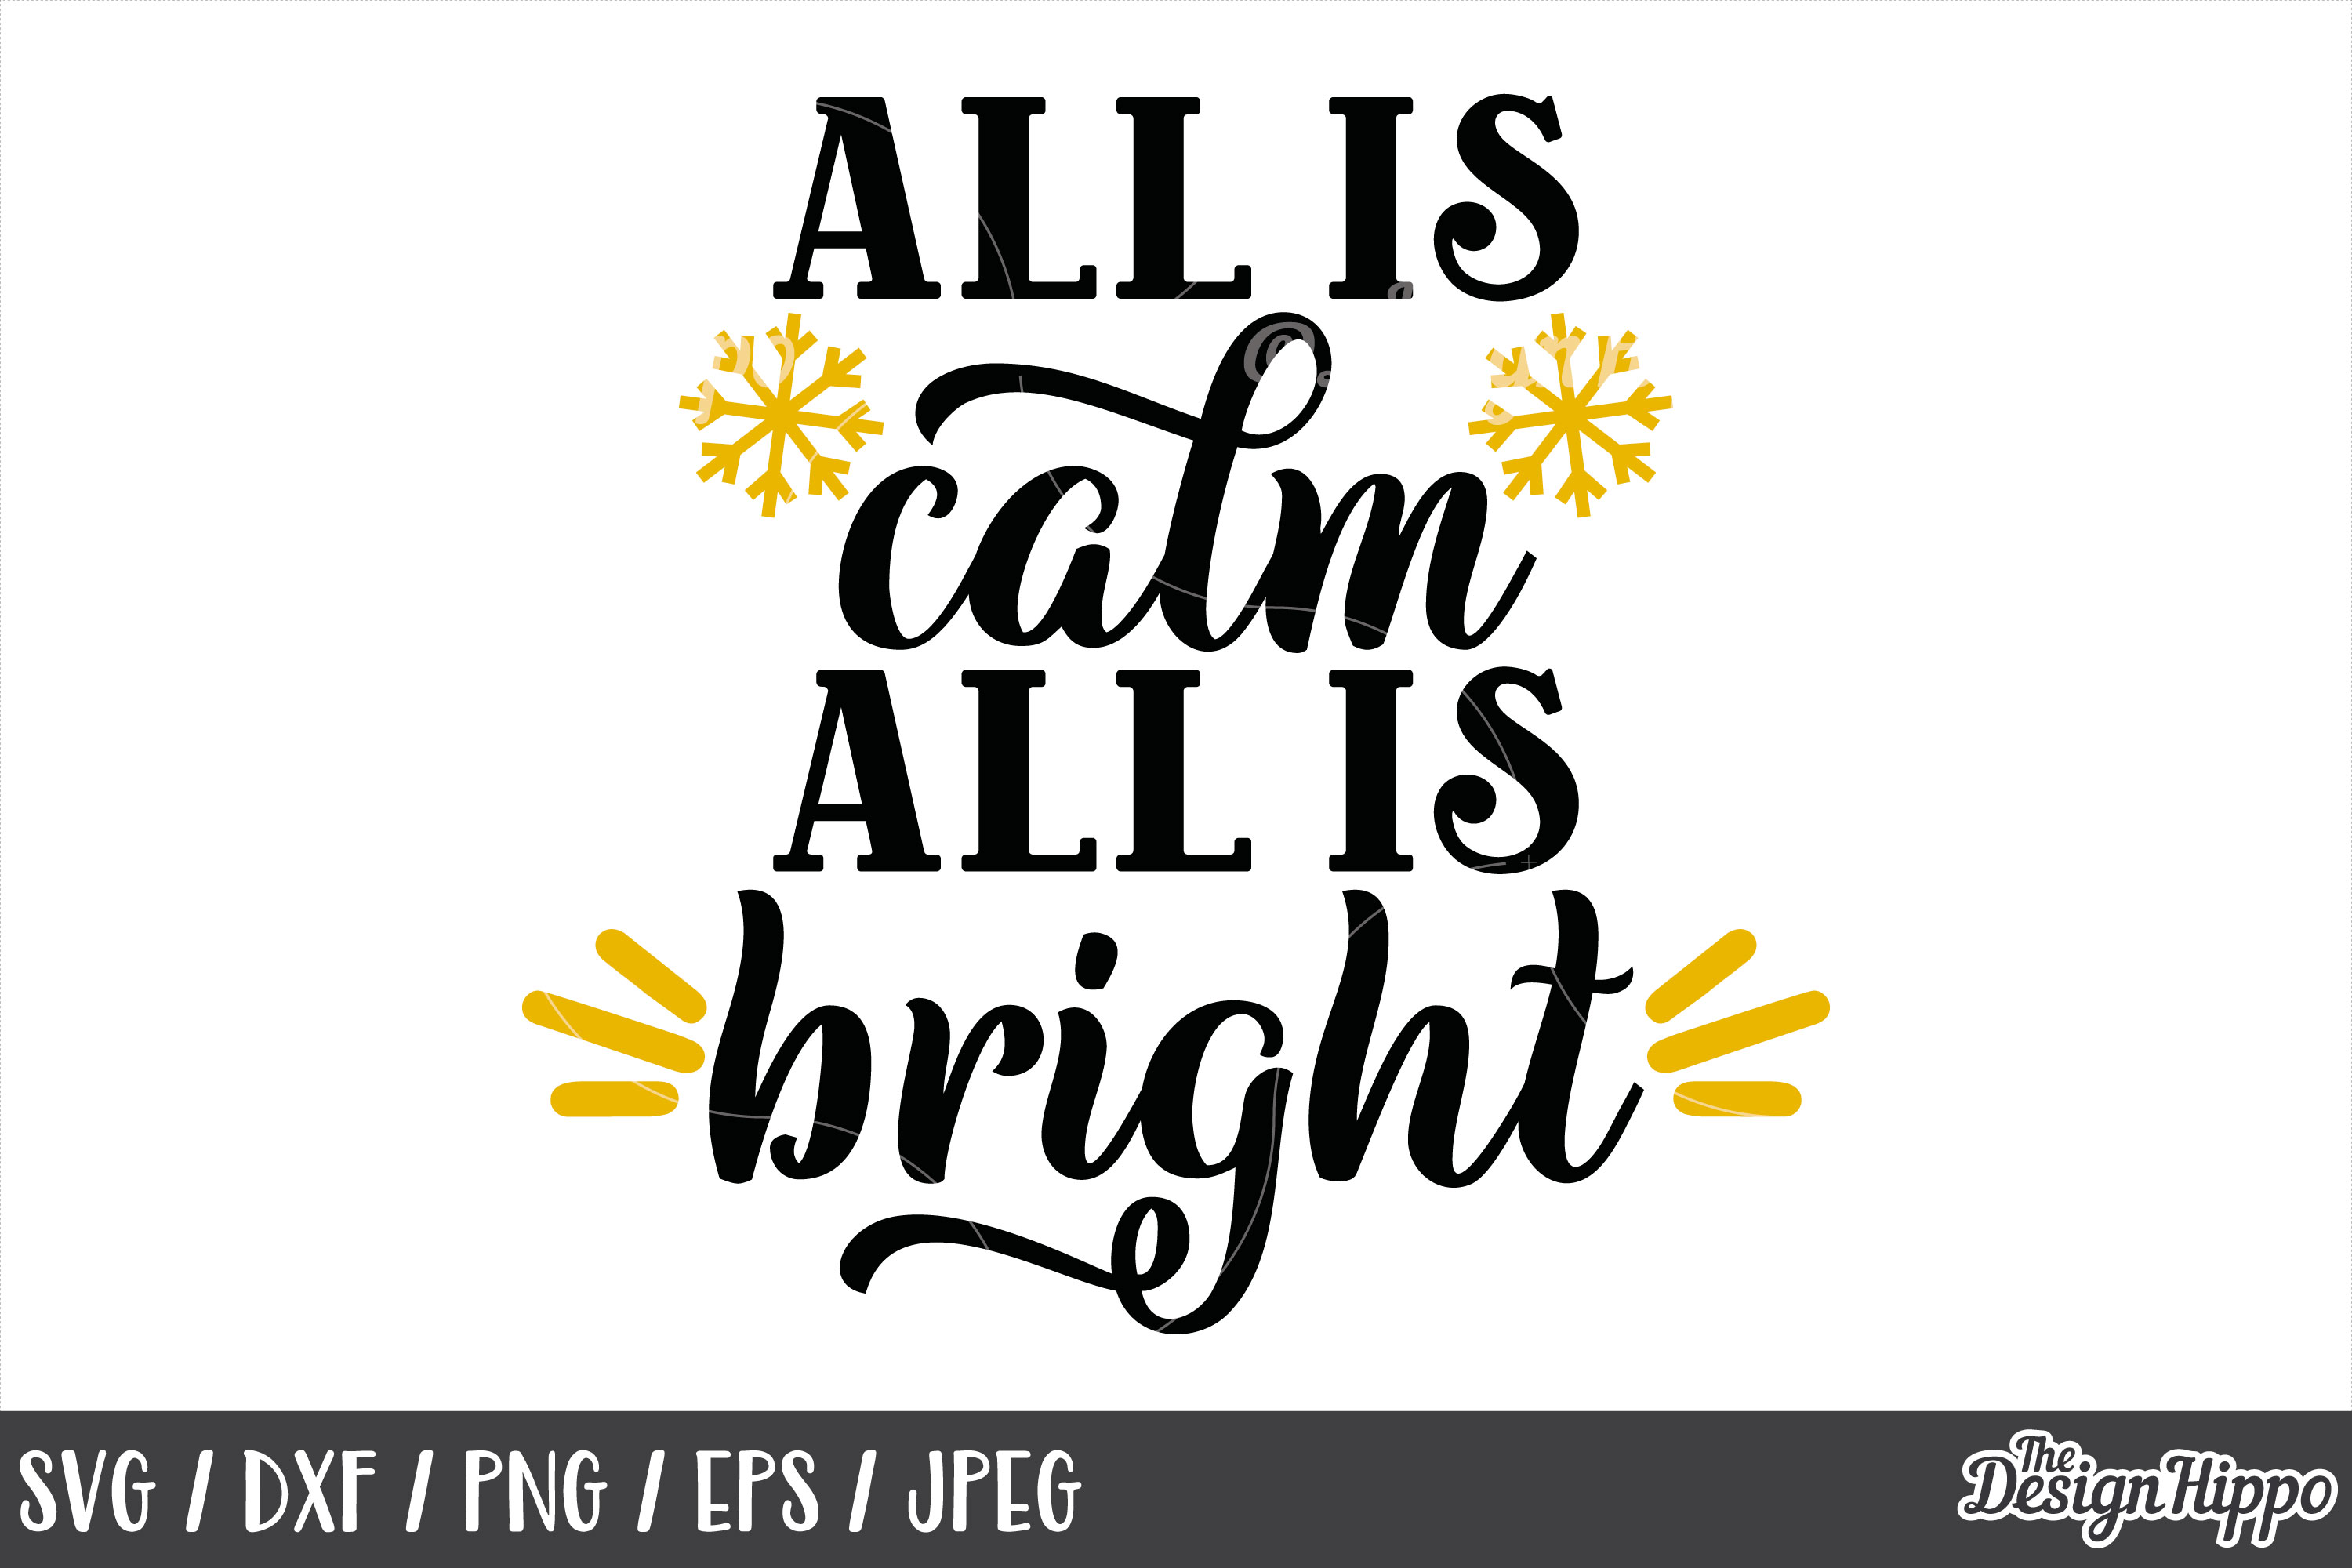 Download All Is Calm All Is Bright, Christmas, SVG, PNG, DXF Cut File